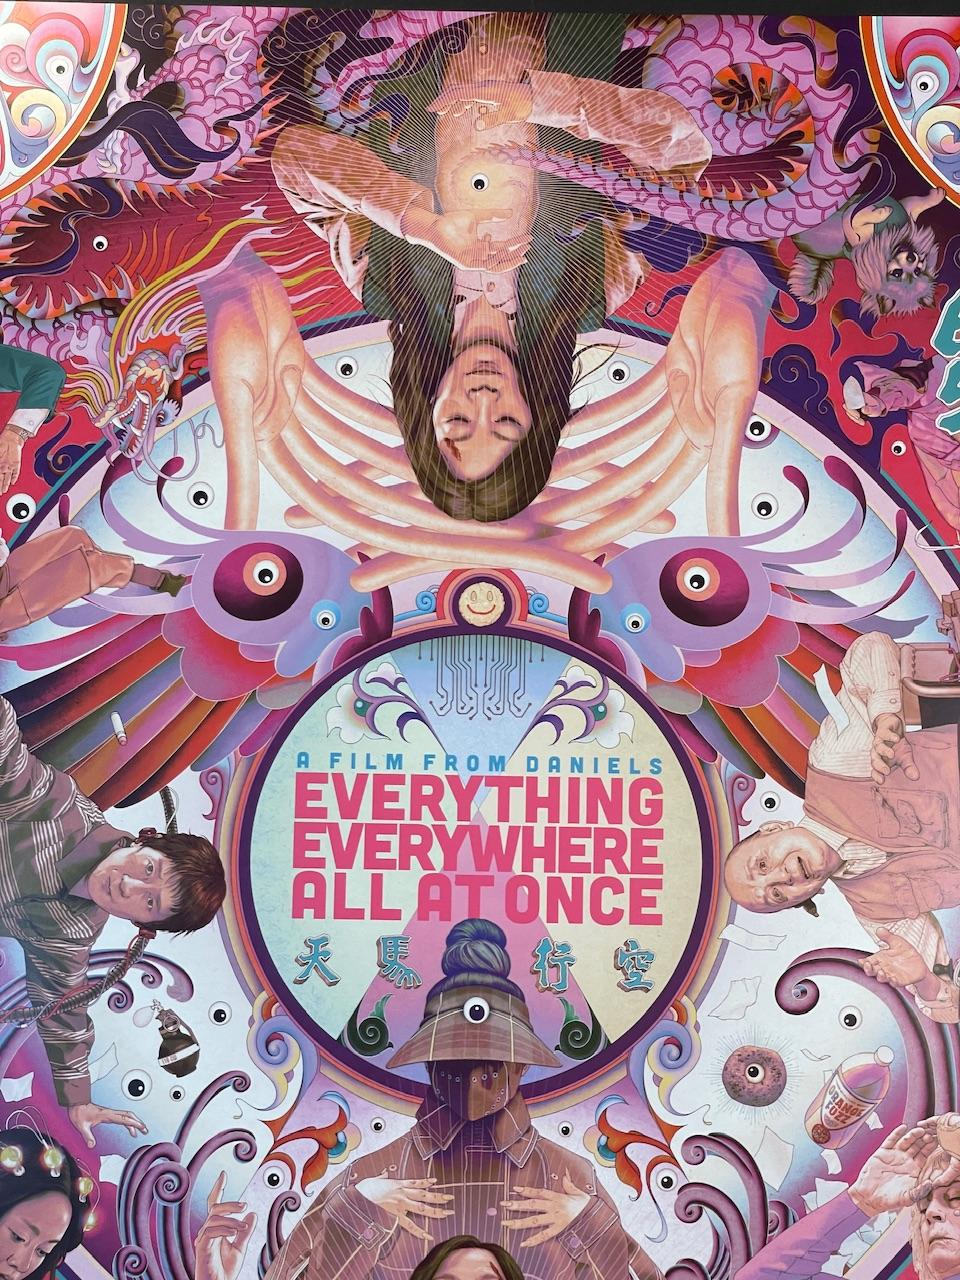 Everything Everywhere All At Once (A24 Variant) Poster by James Jean
Edition size of 1000
Poster size of 24